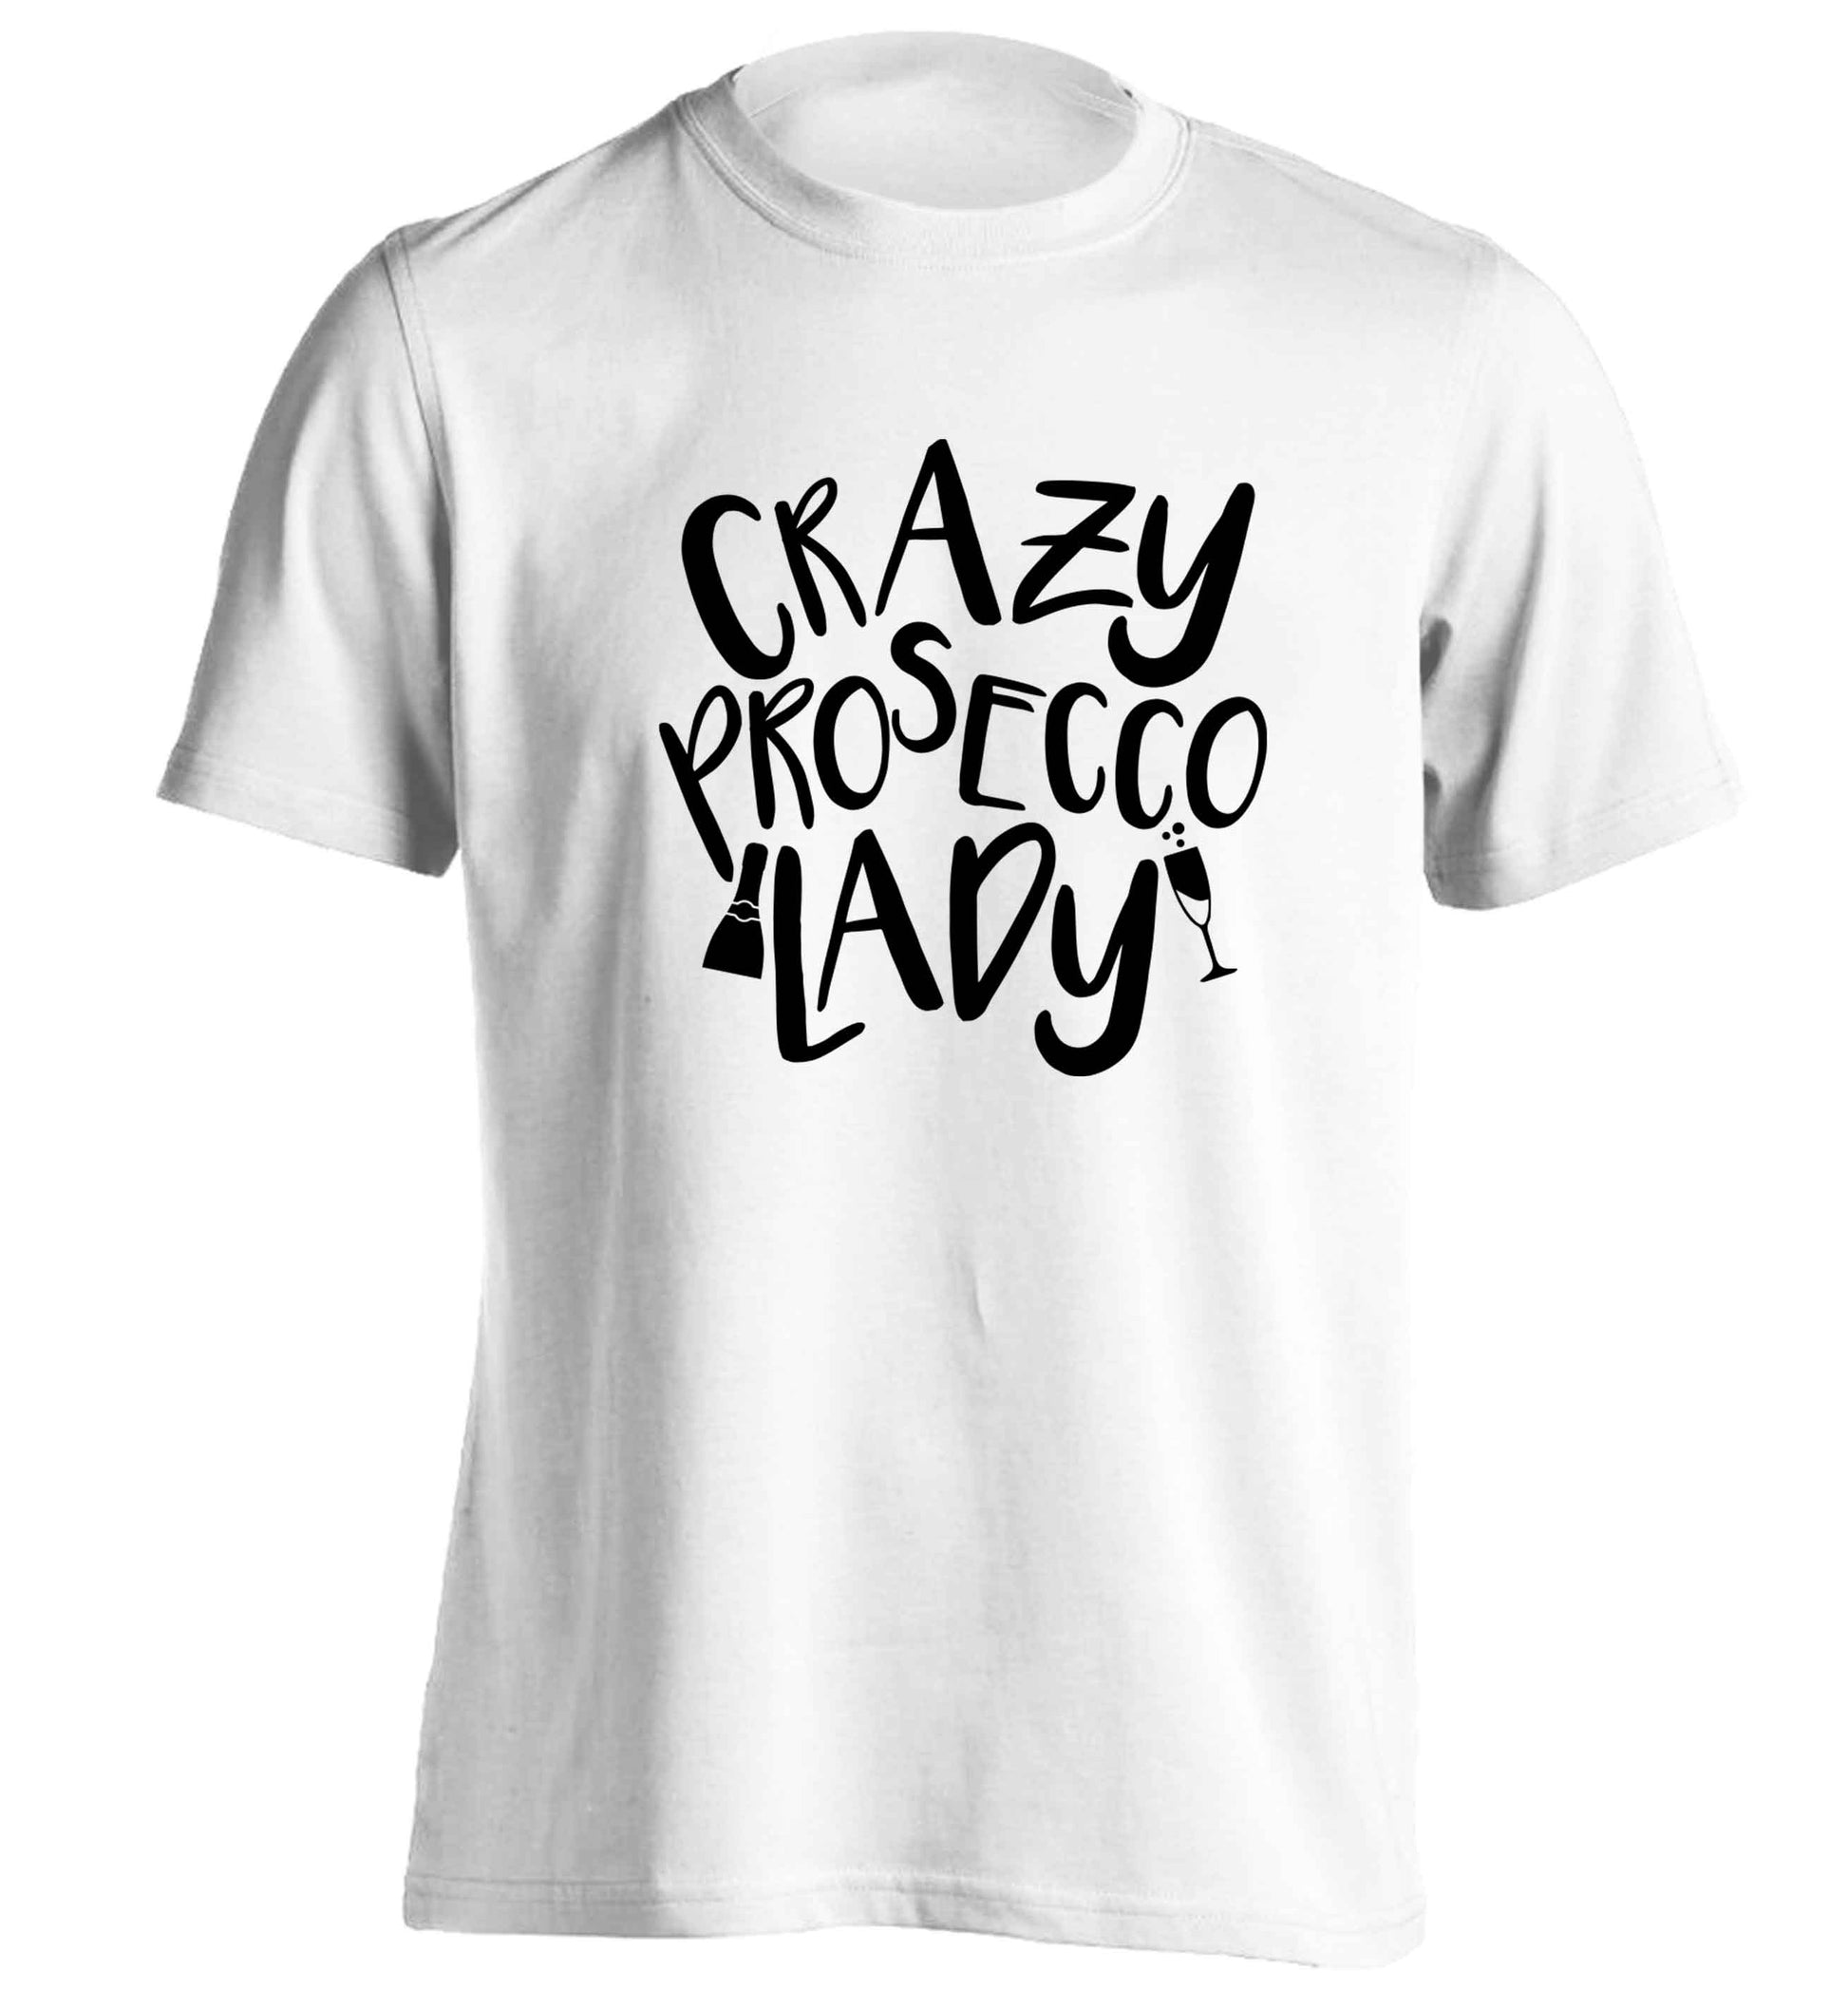 Crazy prosecco lady adults unisex white Tshirt 2XL